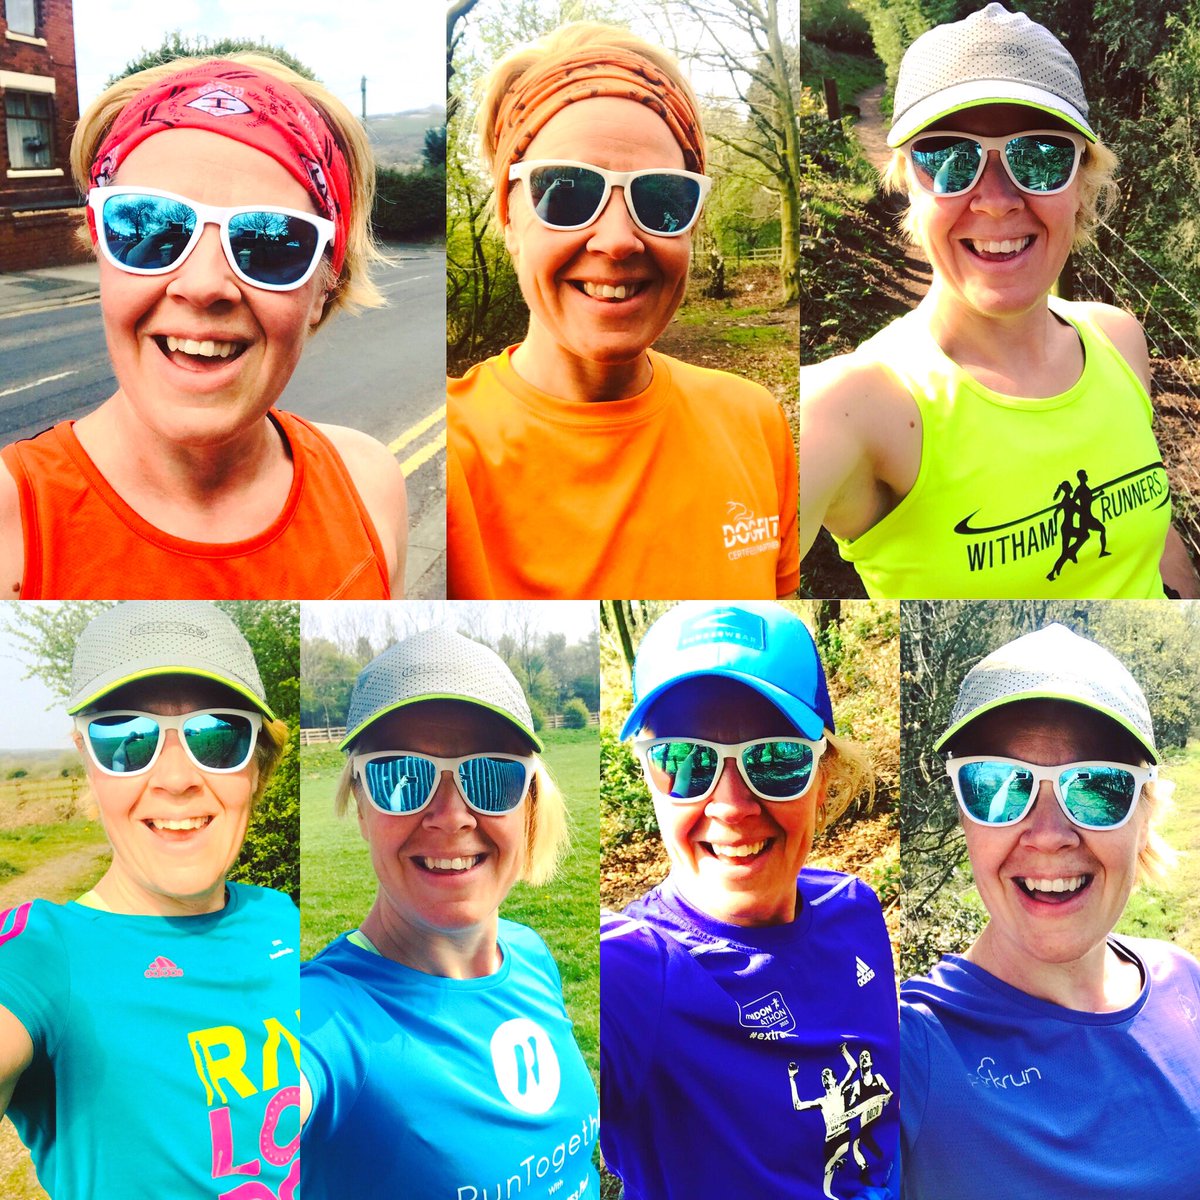 I finished my rainbow!  It’s been fun wearing different tops and revisiting  #running memories. In case anyone’s interested I’ve posted a little bit about them in this thread  #UKRunChat